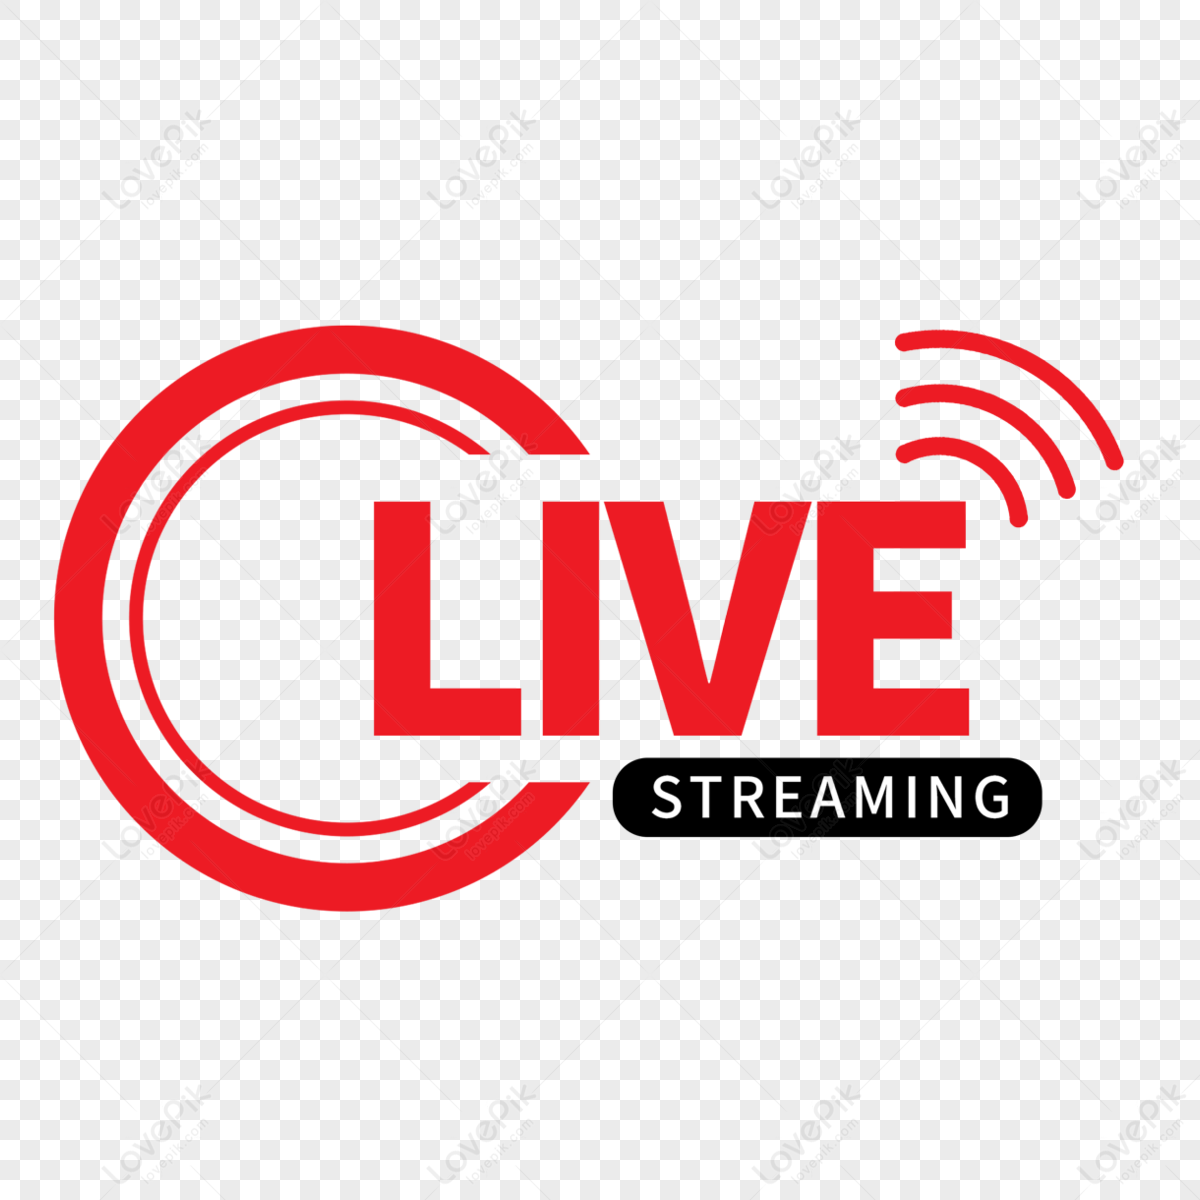 Live Streaming Clipart Hd PNG, Red Maroon Twitch Live Streaming Pop Up,  Streaming, Design, Twitch PNG Image For Free Download | Best self quotes,  Graphic design inspiration poster, Book design layout